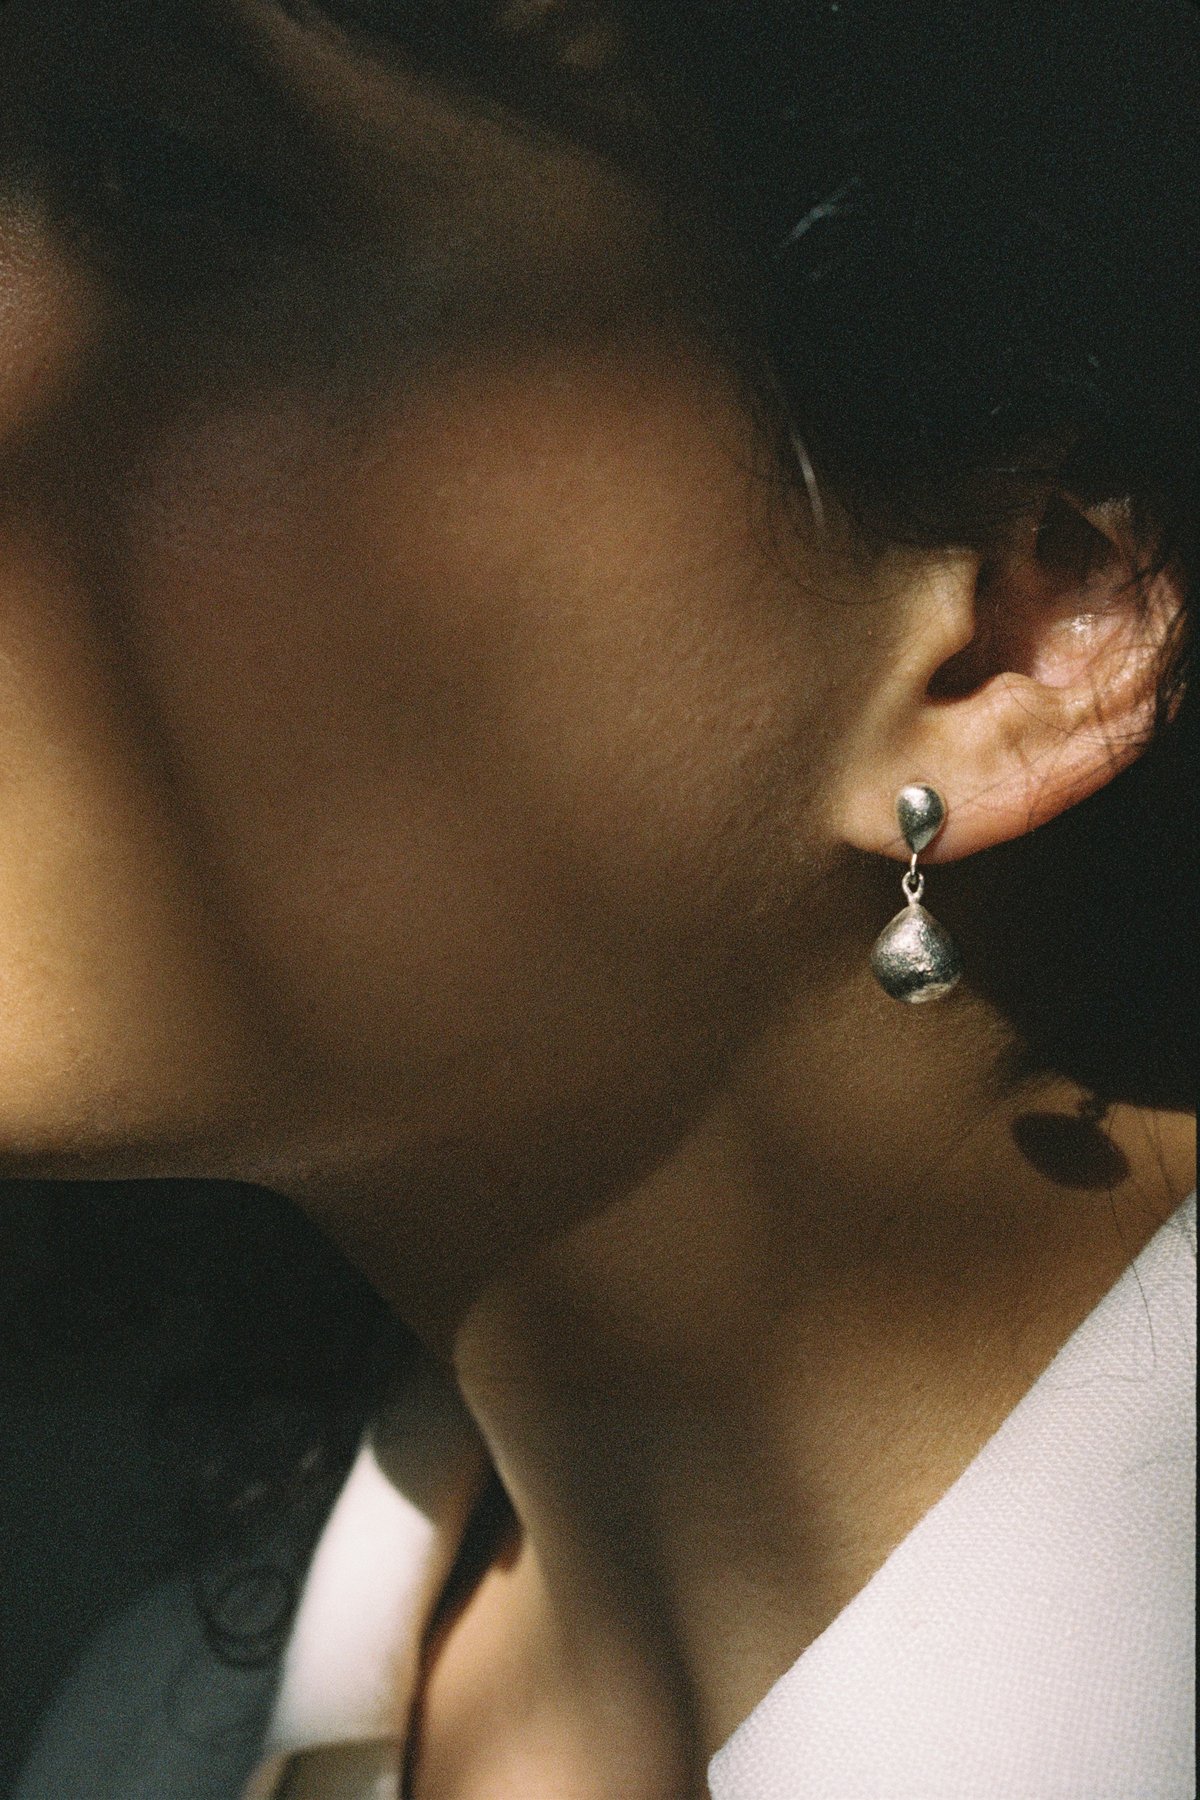 Image of Edition 5. Piece 5. Earrings